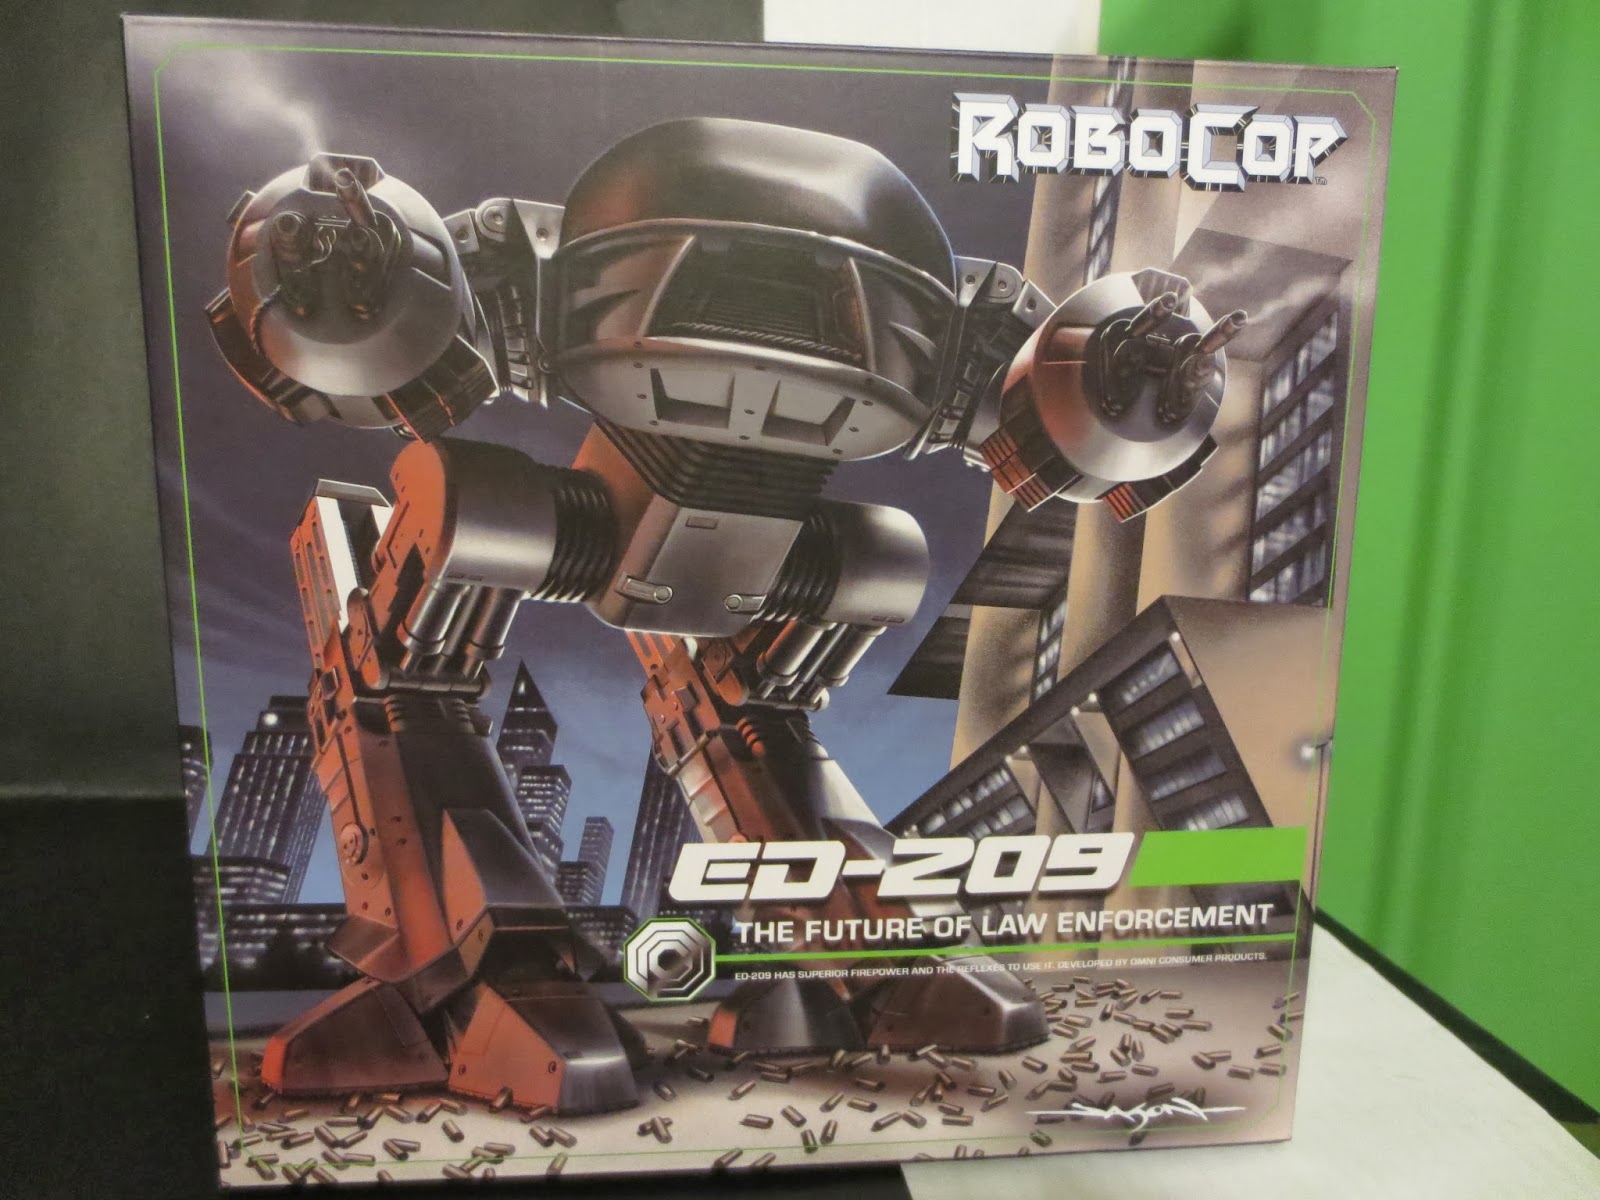 Action Figure Review: ED-209 from RoboCop by NECA